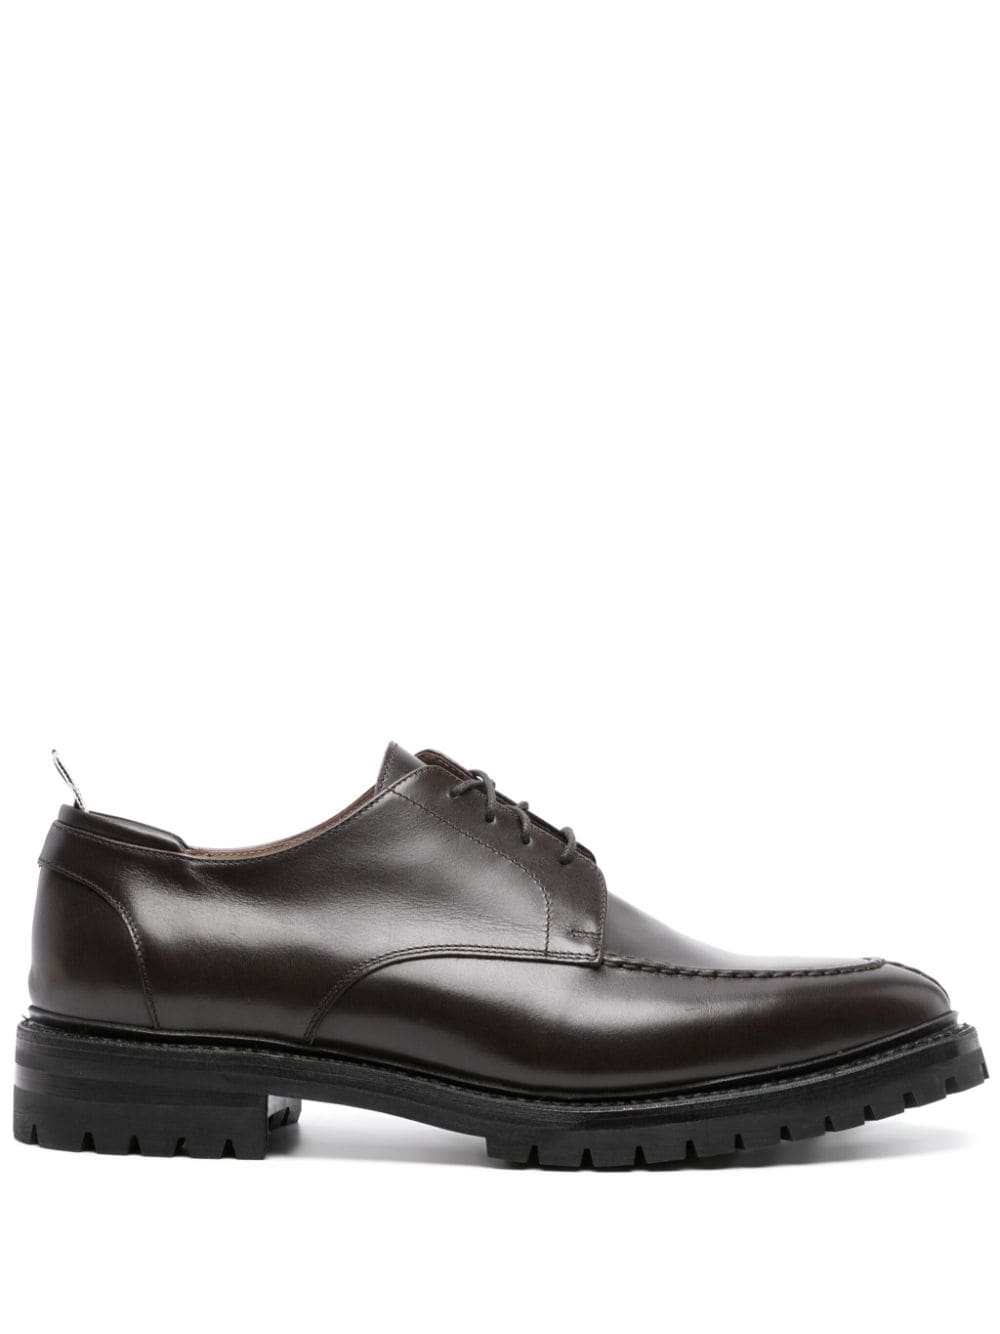 Image 1 of Thom Browne leather derby shoes